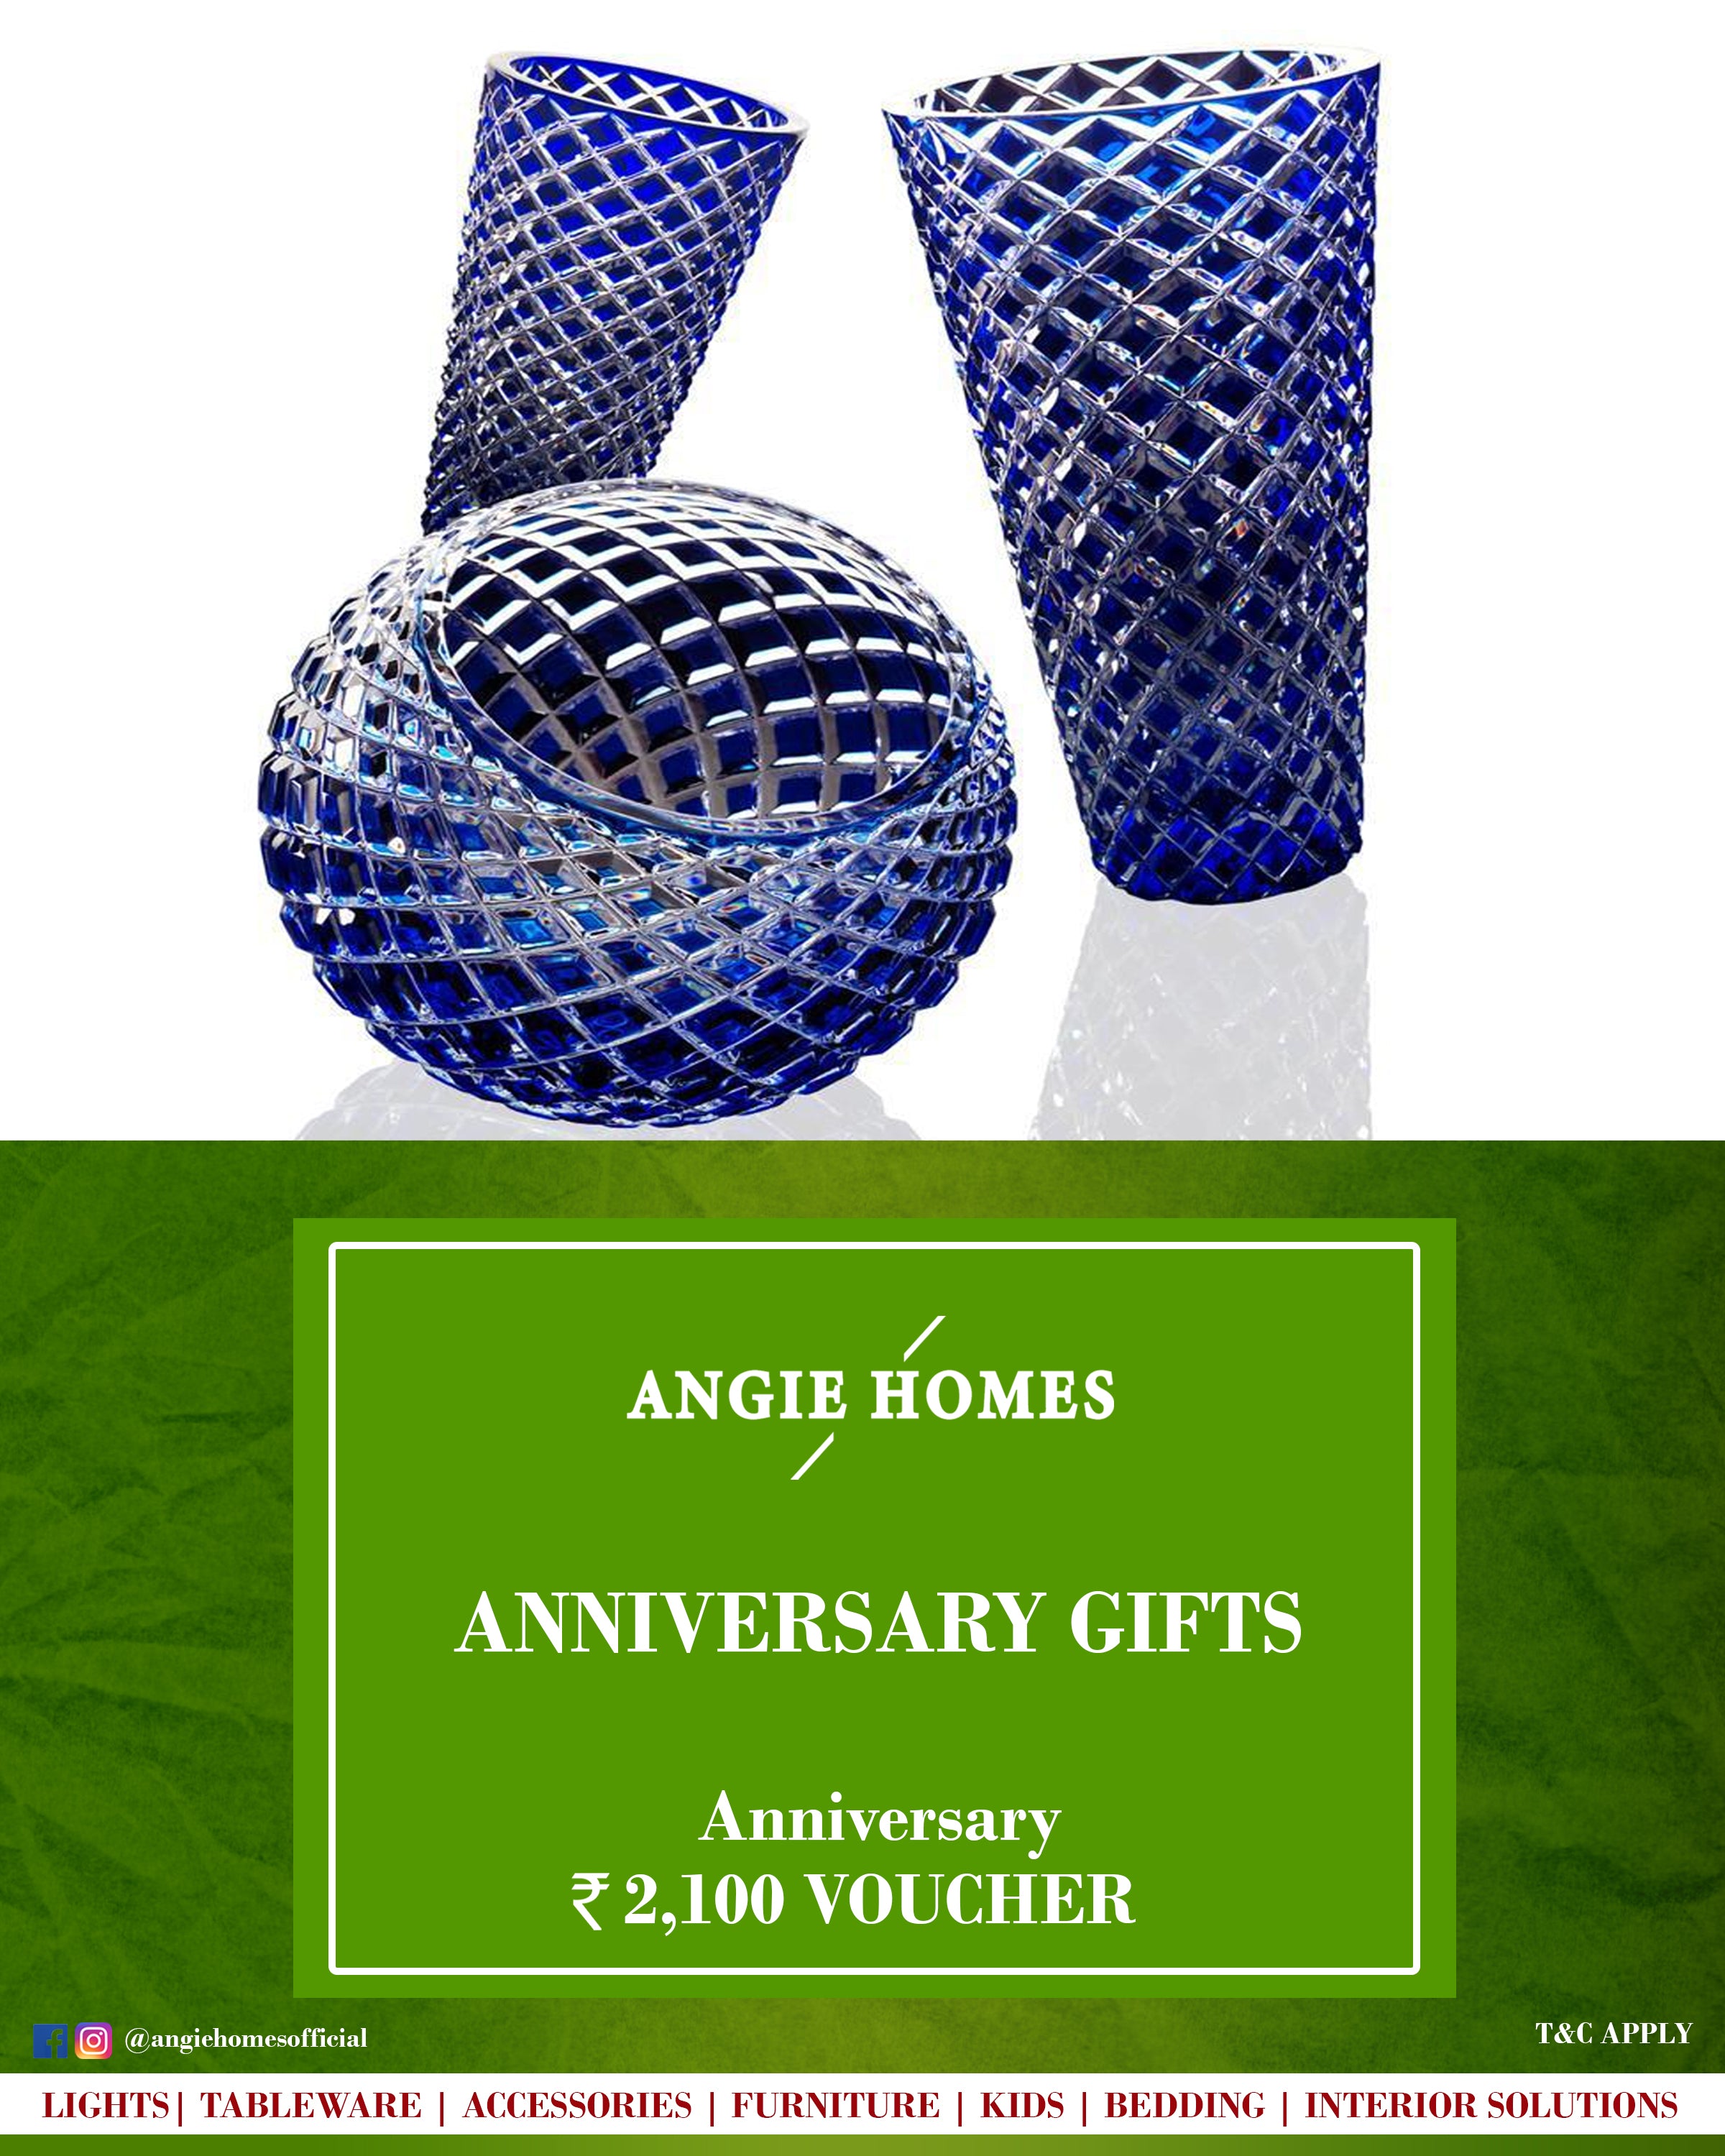 Home Decor Crystal Vases for Anniversary Gift Card Voucher - Angie Homes E-Gift Card